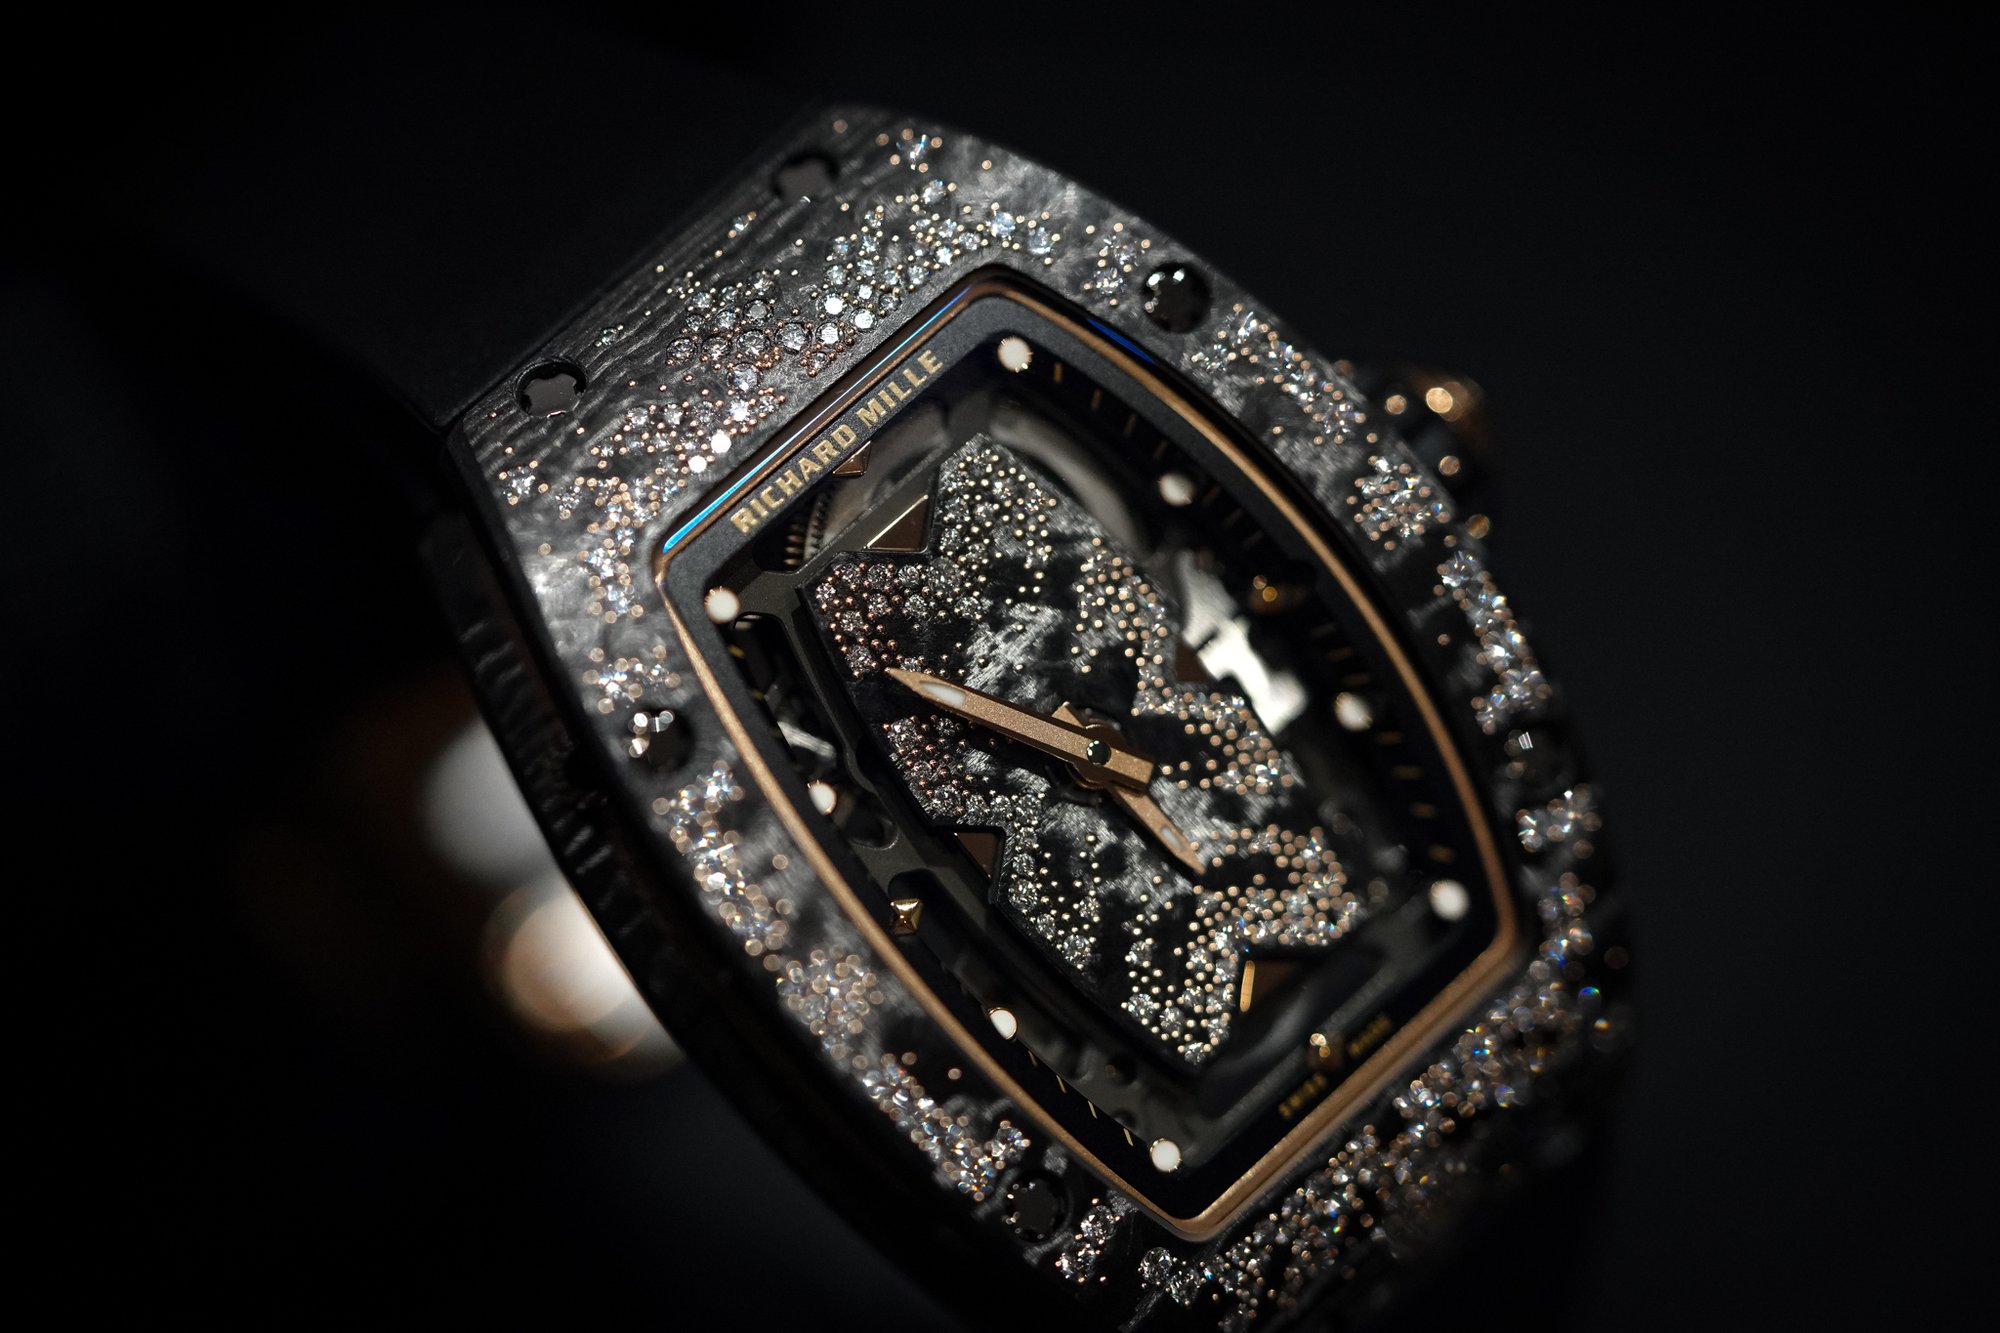 Richard Mille Rm 07 01 Bright Night Intergalactic In Kowloon, Hong 